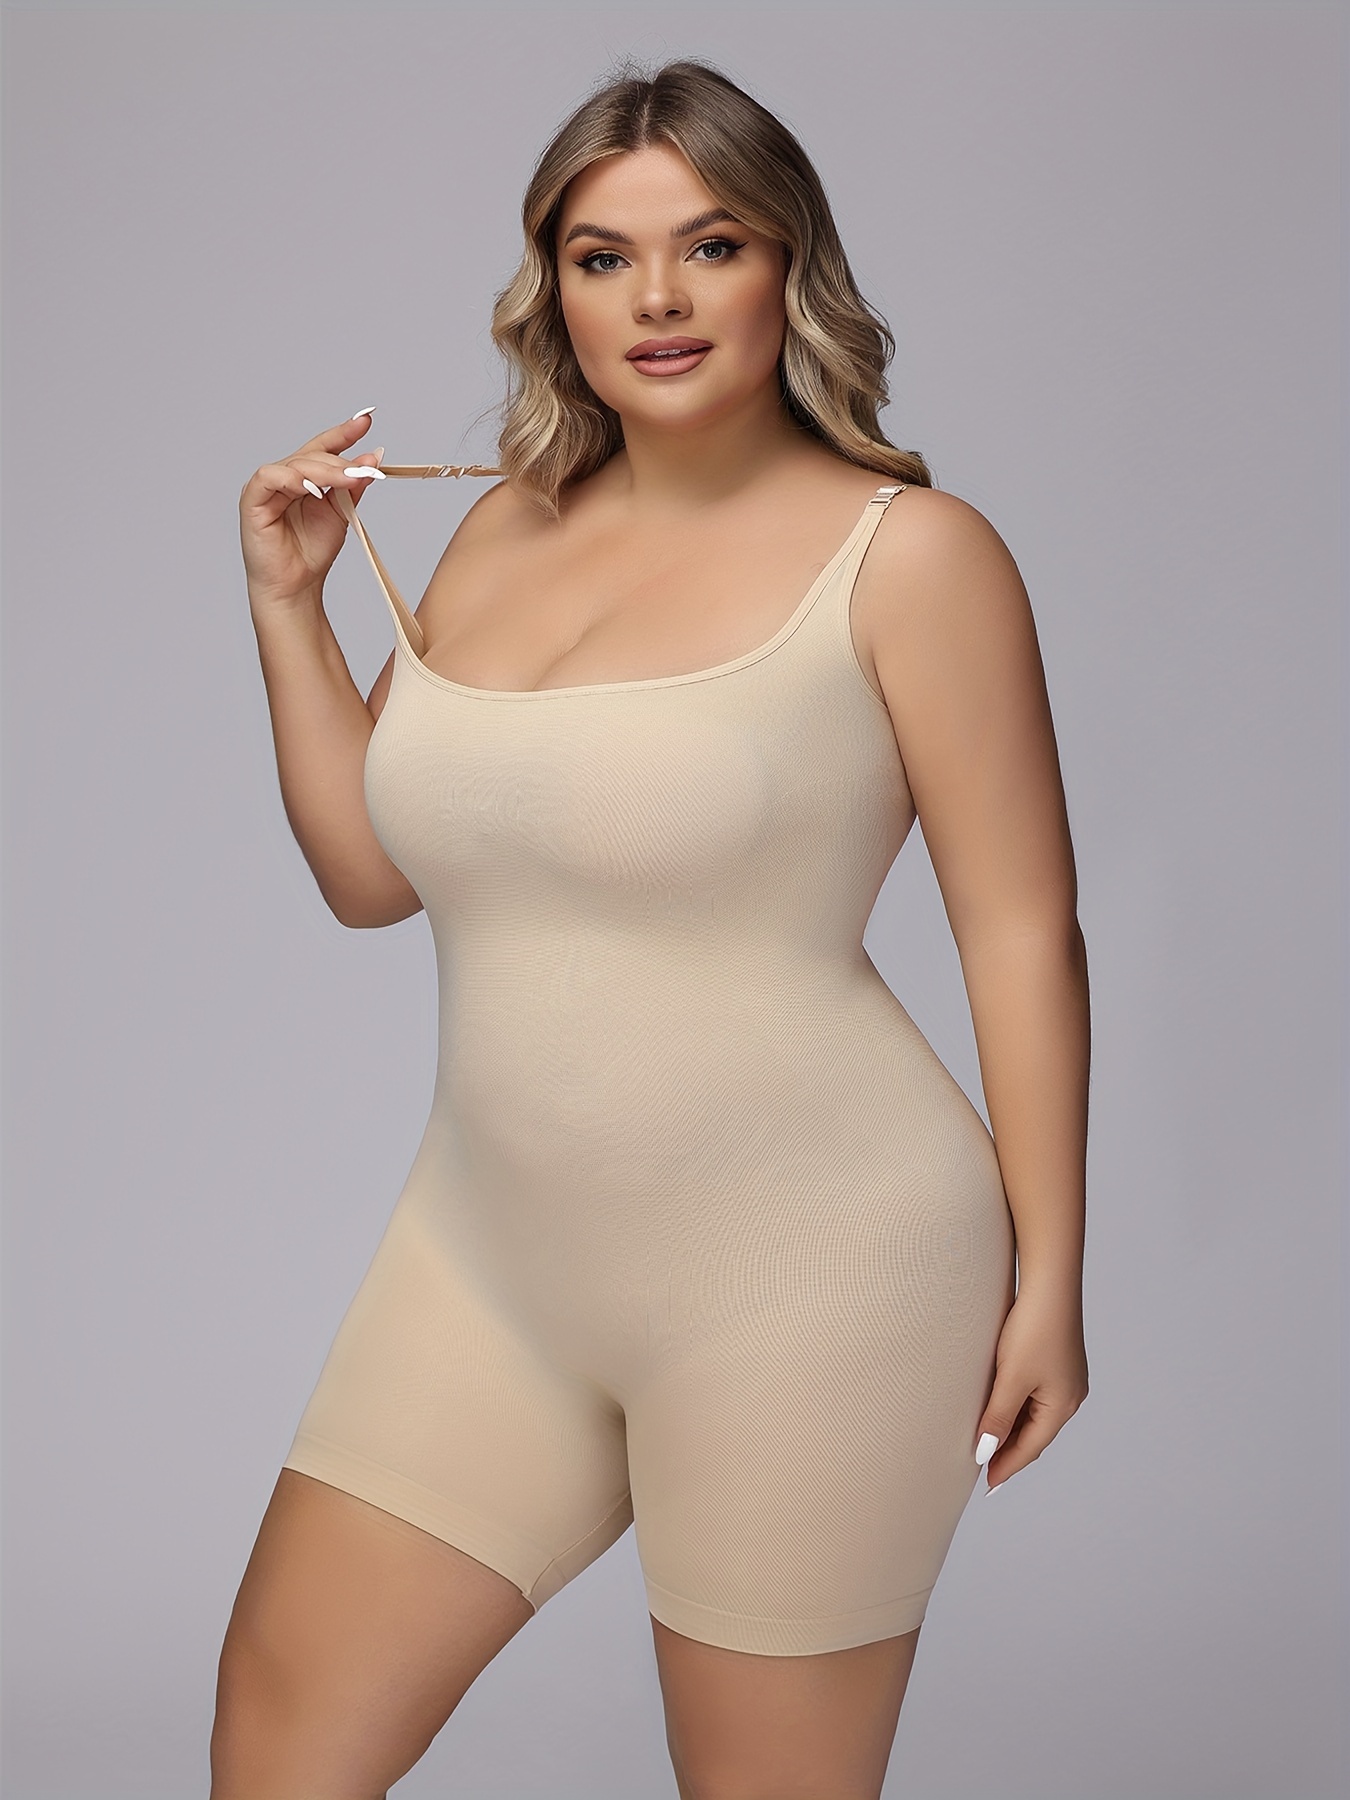 Women's Simple Shapewear Bodysuit, Plus Size Solid Seamless Tummy Control  Slimming Cami Body Shaper, Check Out Today's Deals Now